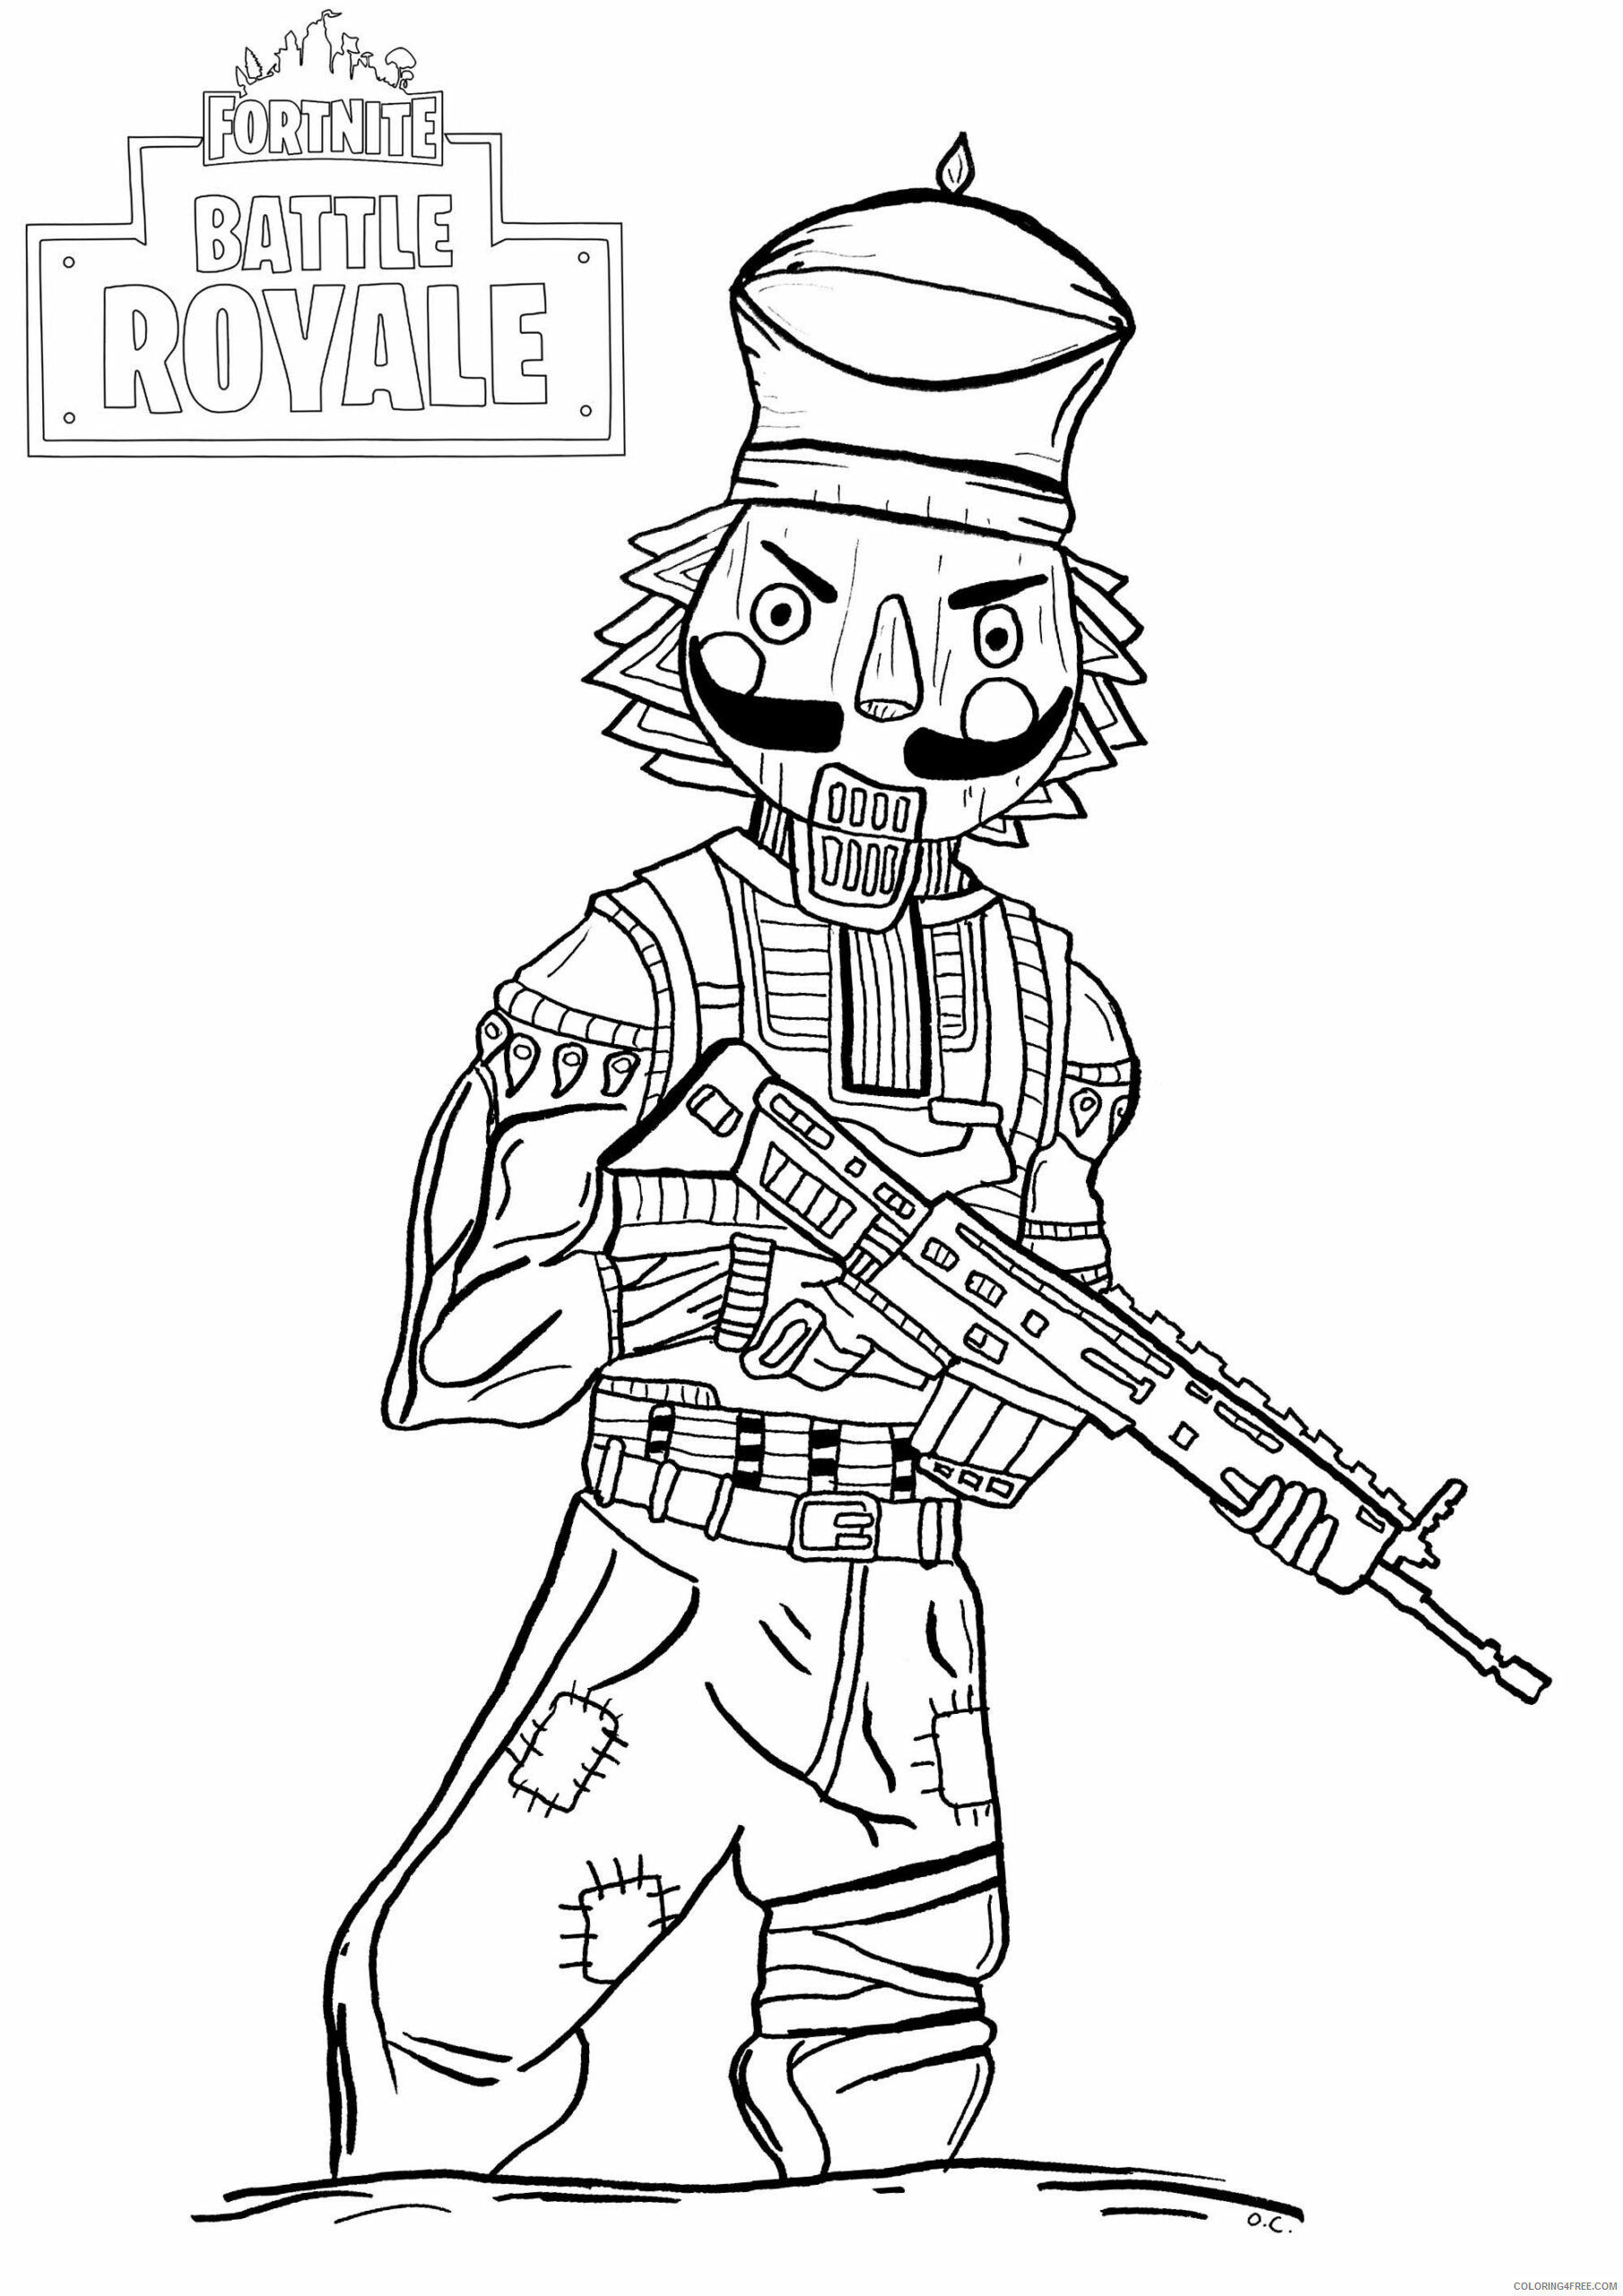 Fortnite Coloring Pages Games children battle royale 60638 Printable 2021 0239 Coloring4free